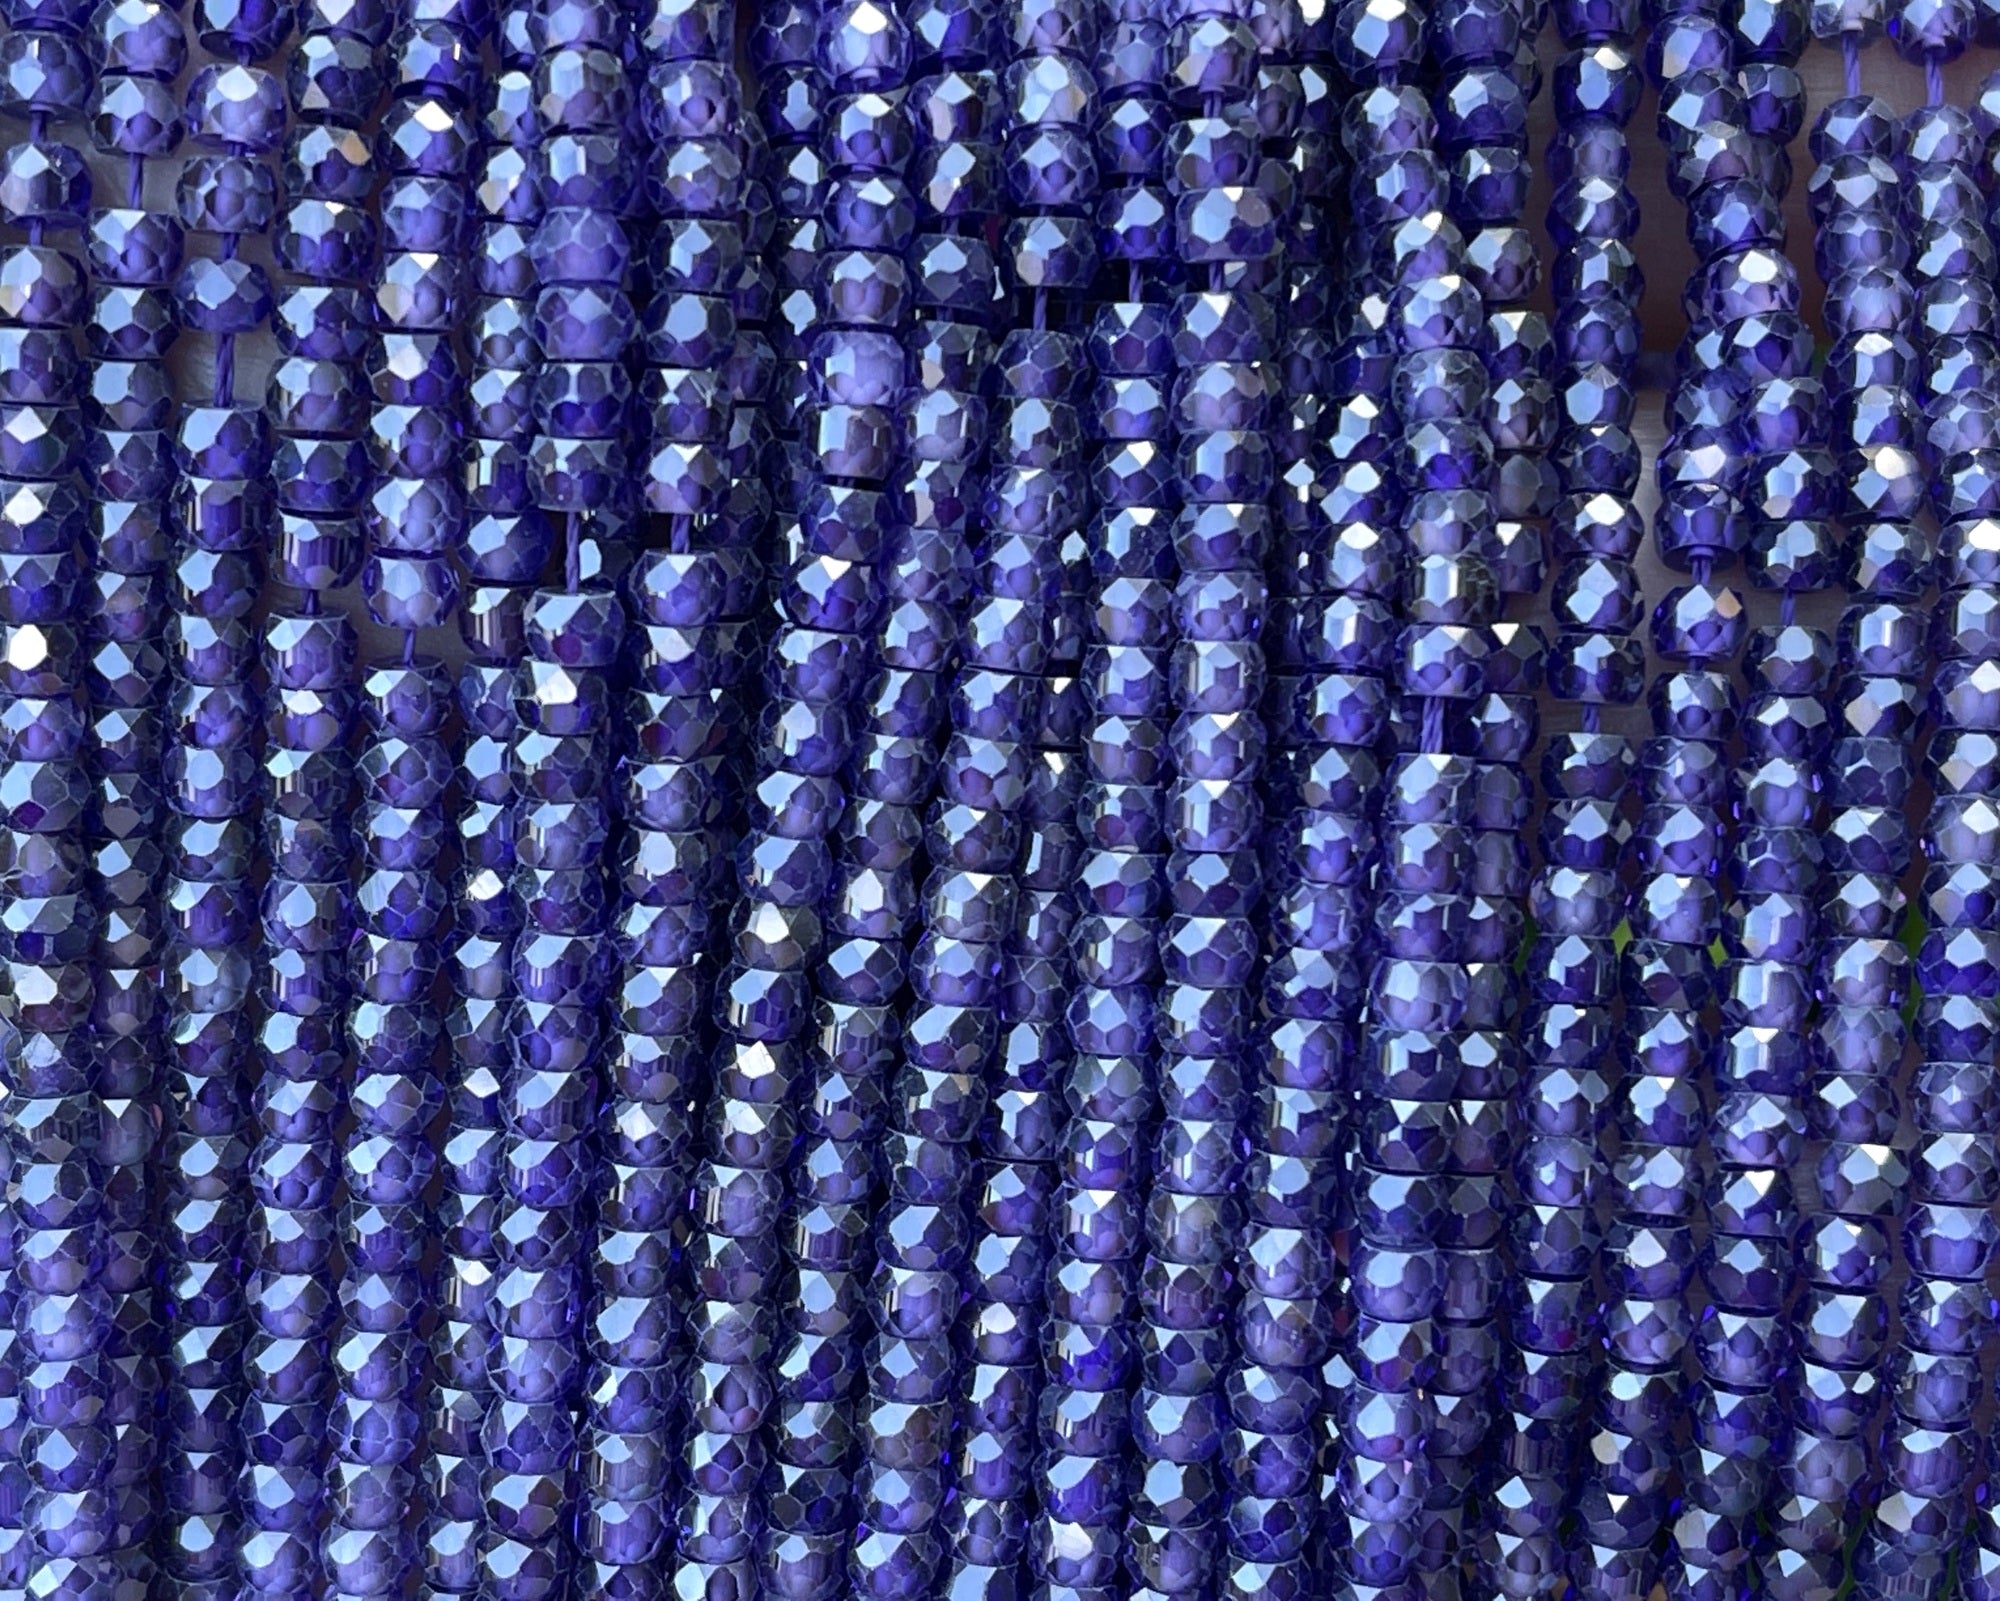 Purple Zircon 3x2mm rondelle micro faceted sparkling CZ beads 15" strand